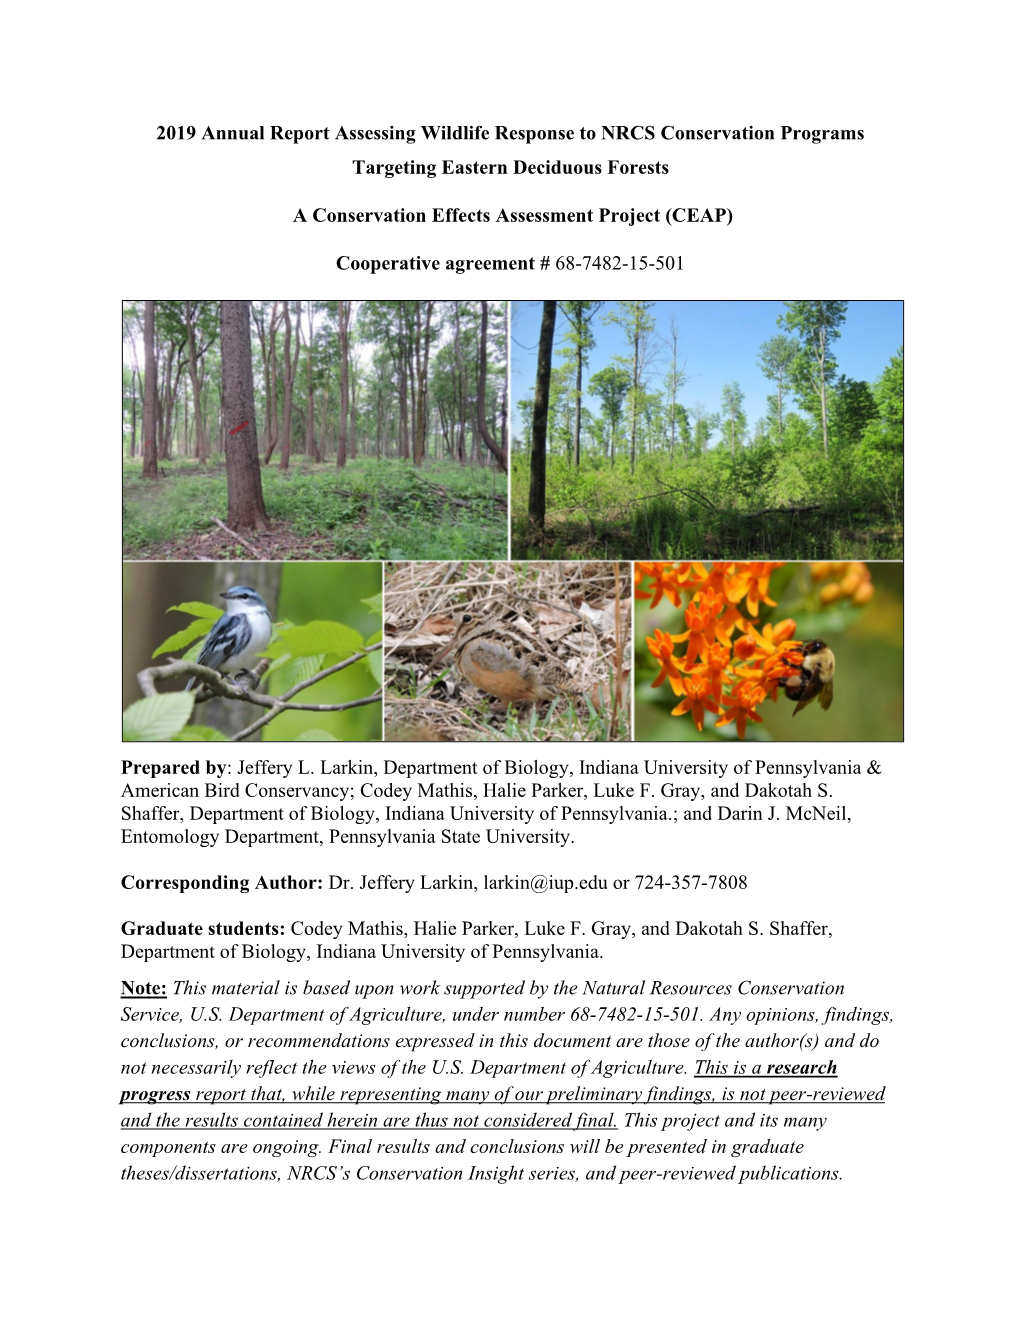 2019 Annual Report Assessing Wildlife Response to NRCS Conservation Programs Targeting Eastern Deciduous Forests